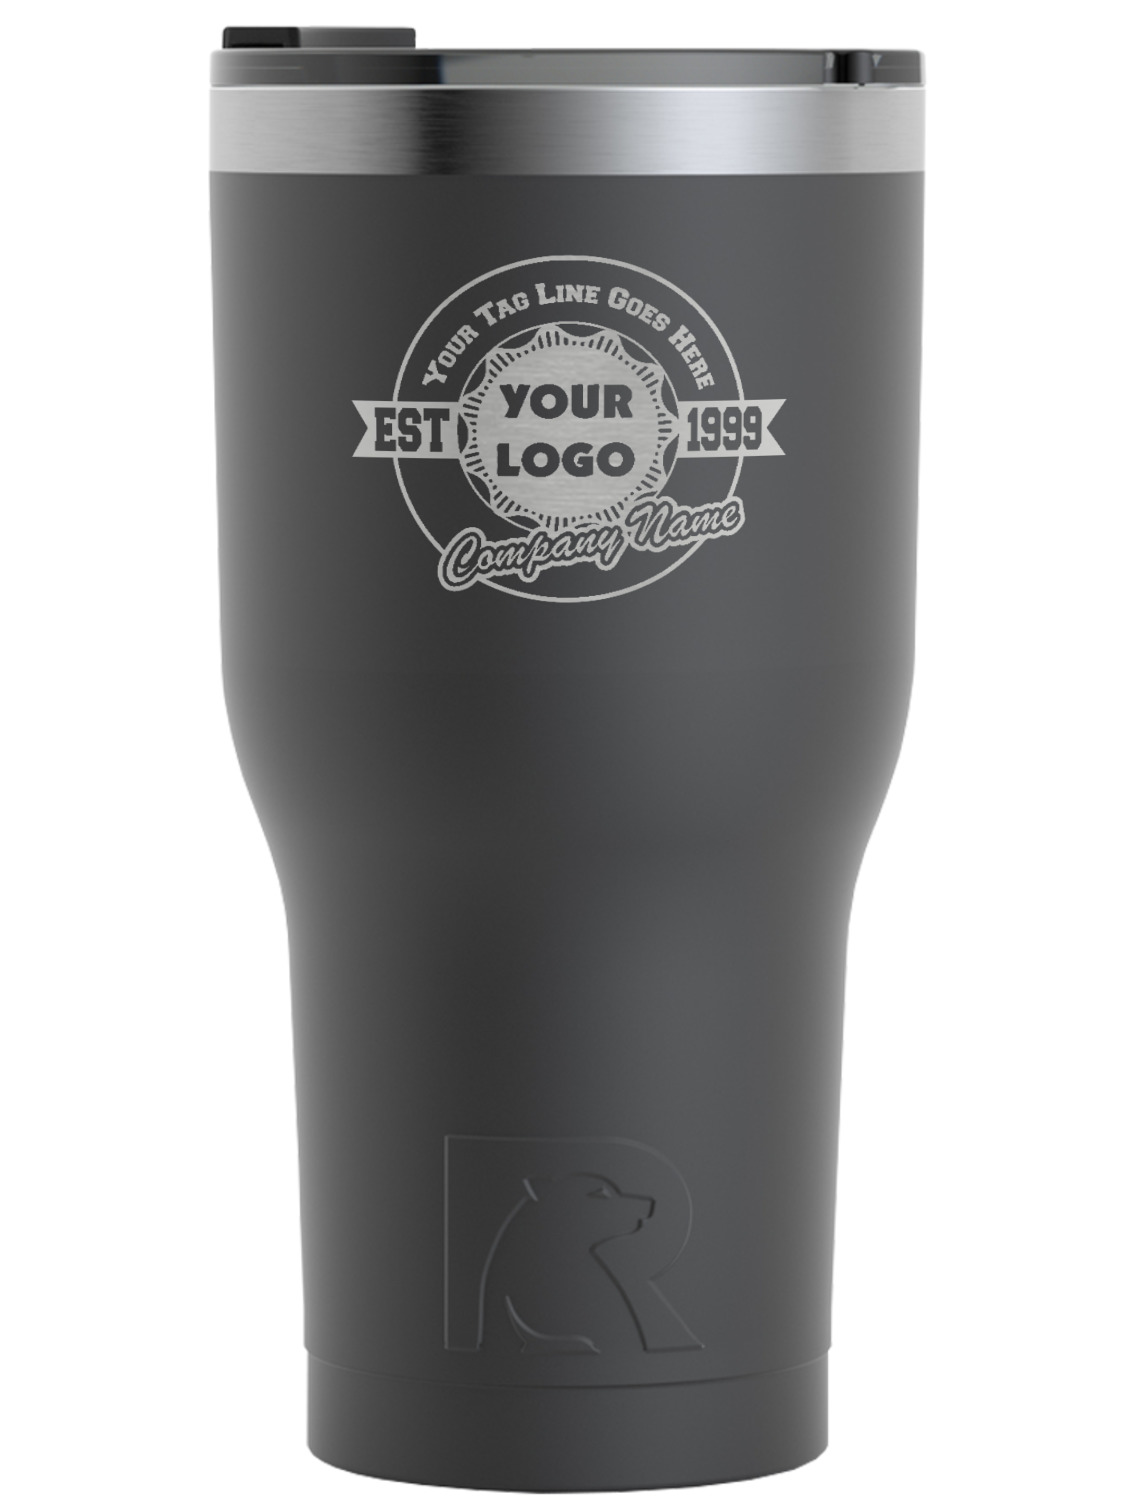 https://www.youcustomizeit.com/common/MAKE/1634642/Logo-Tag-Line-Black-RTIC-Tumbler-Front.jpg?lm=1688678425